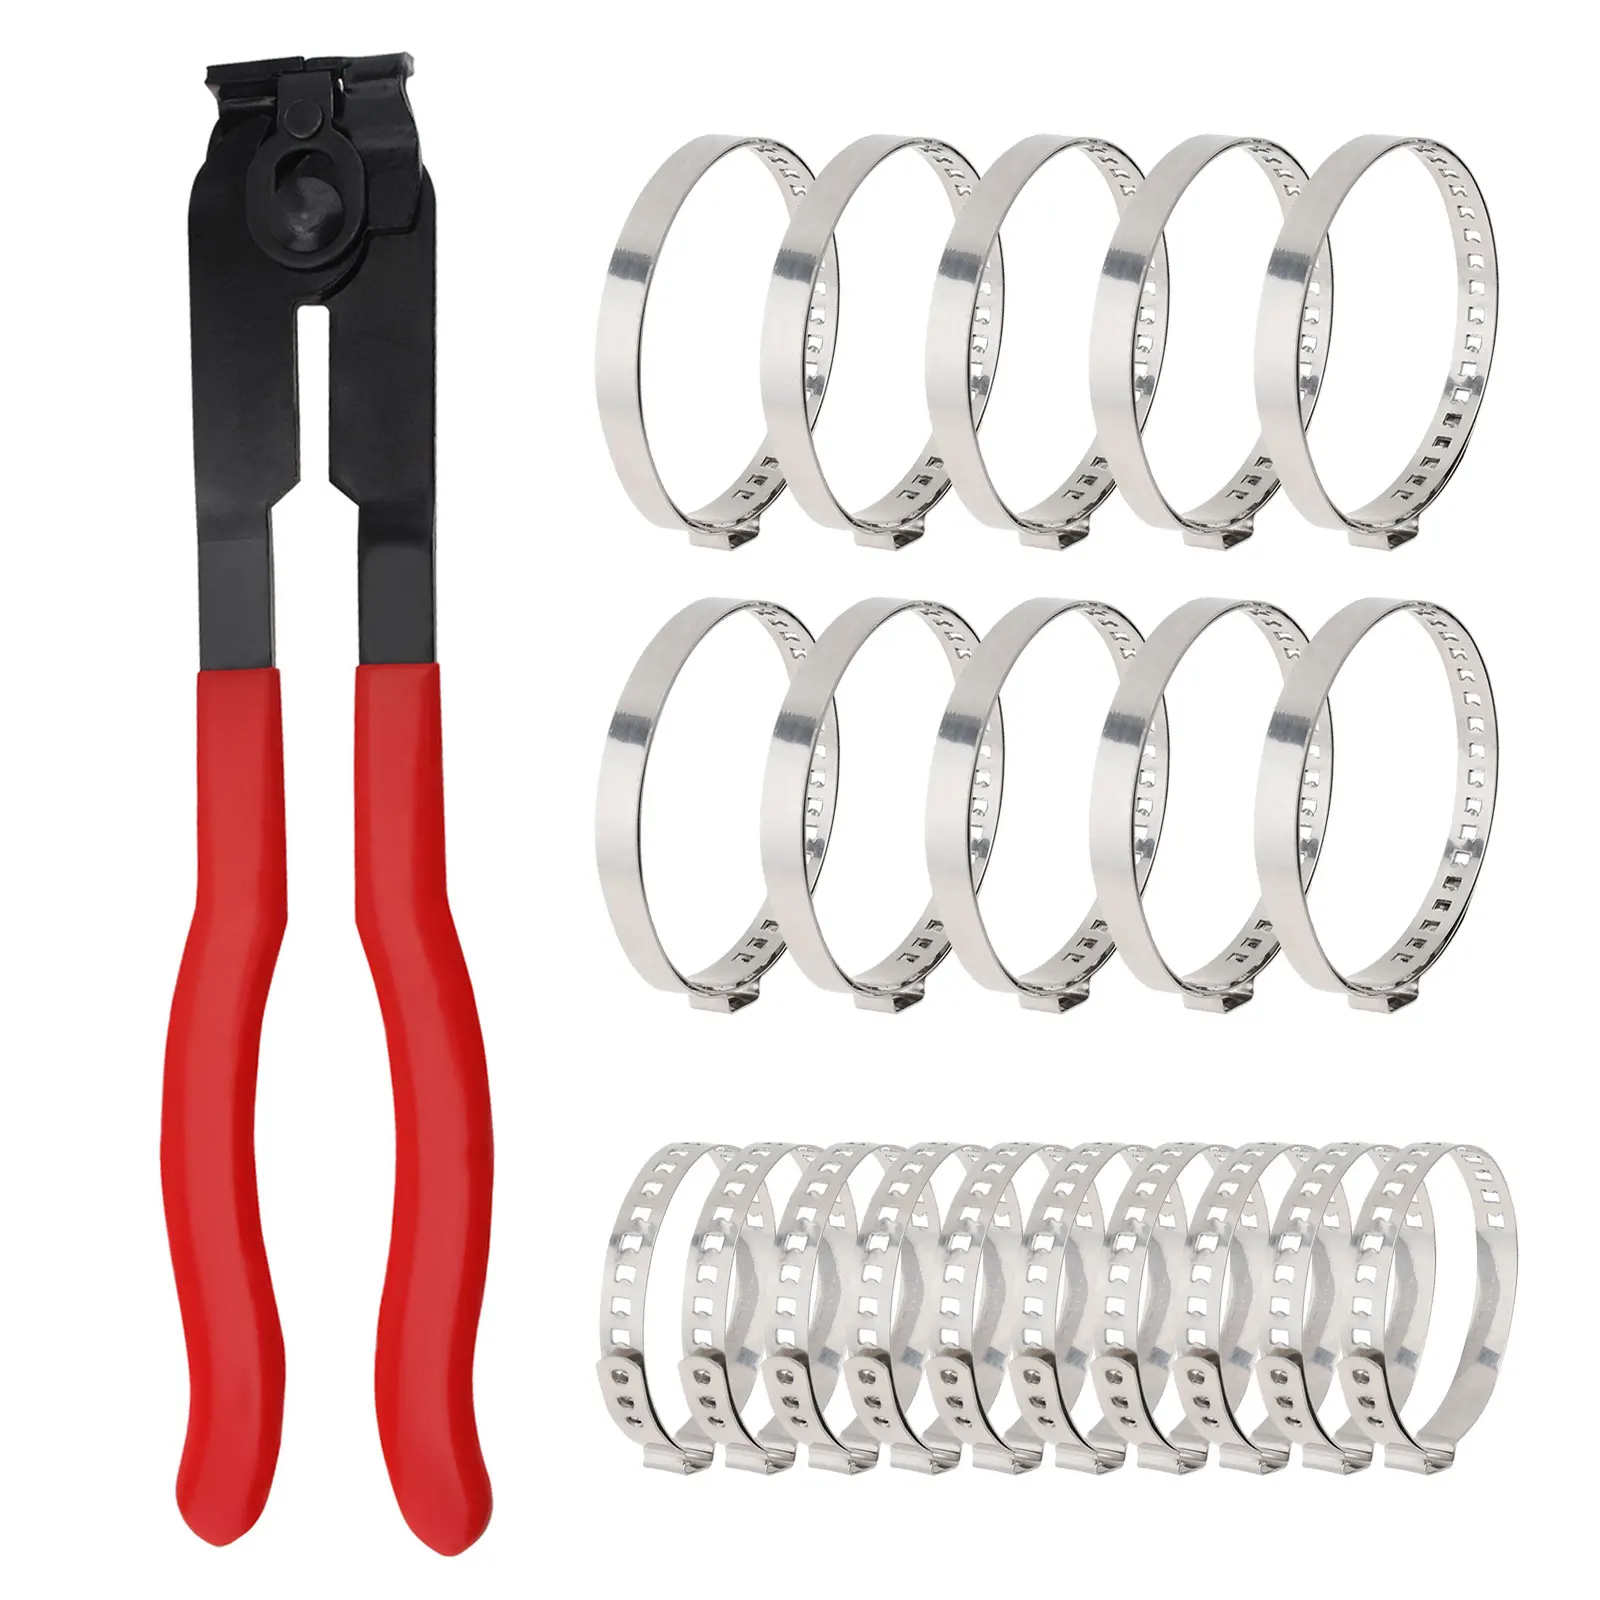 

Heavy Duty Antiskid CV Boot Clamp Pliers Joint Tools for Most Cars with 20 Crimp Bands,CV Joint Axle Boot Clamp Pliers